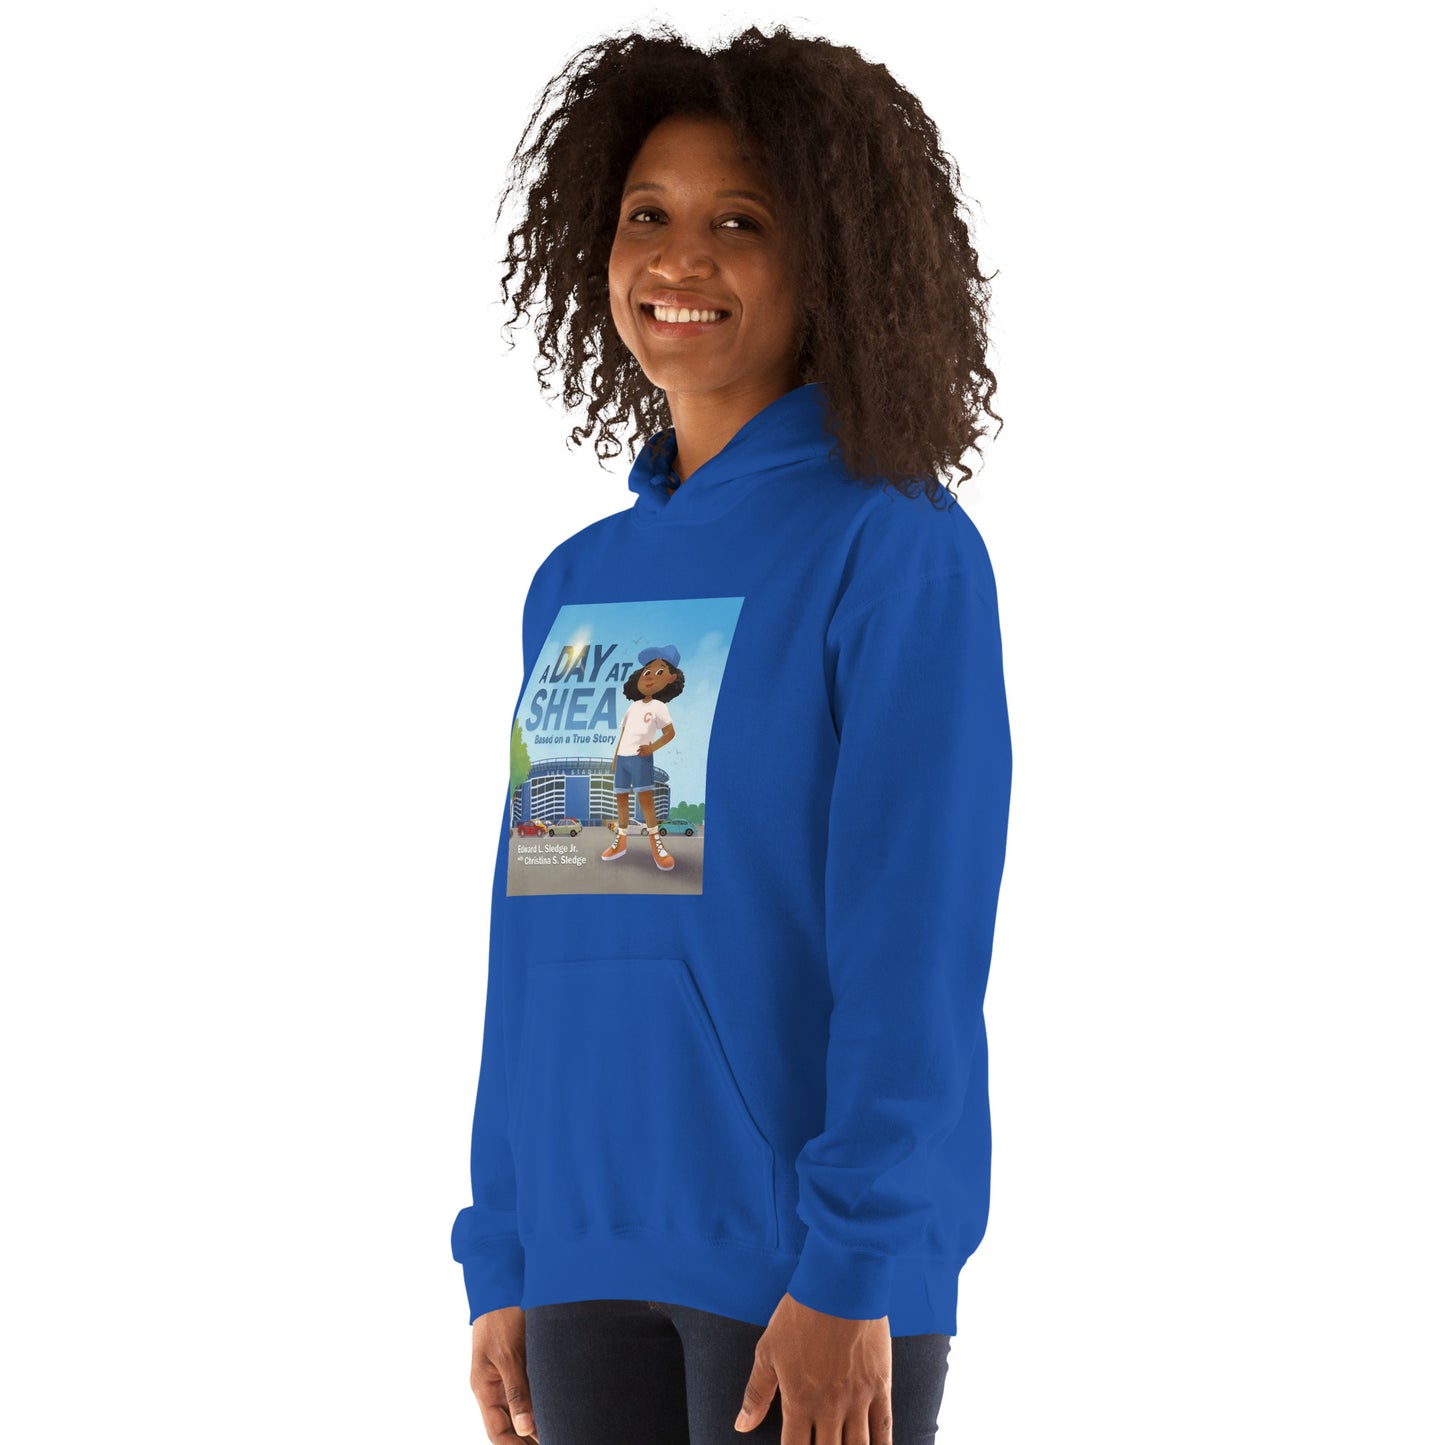 A Day at Shea Adult Unisex Graphic Hoodie